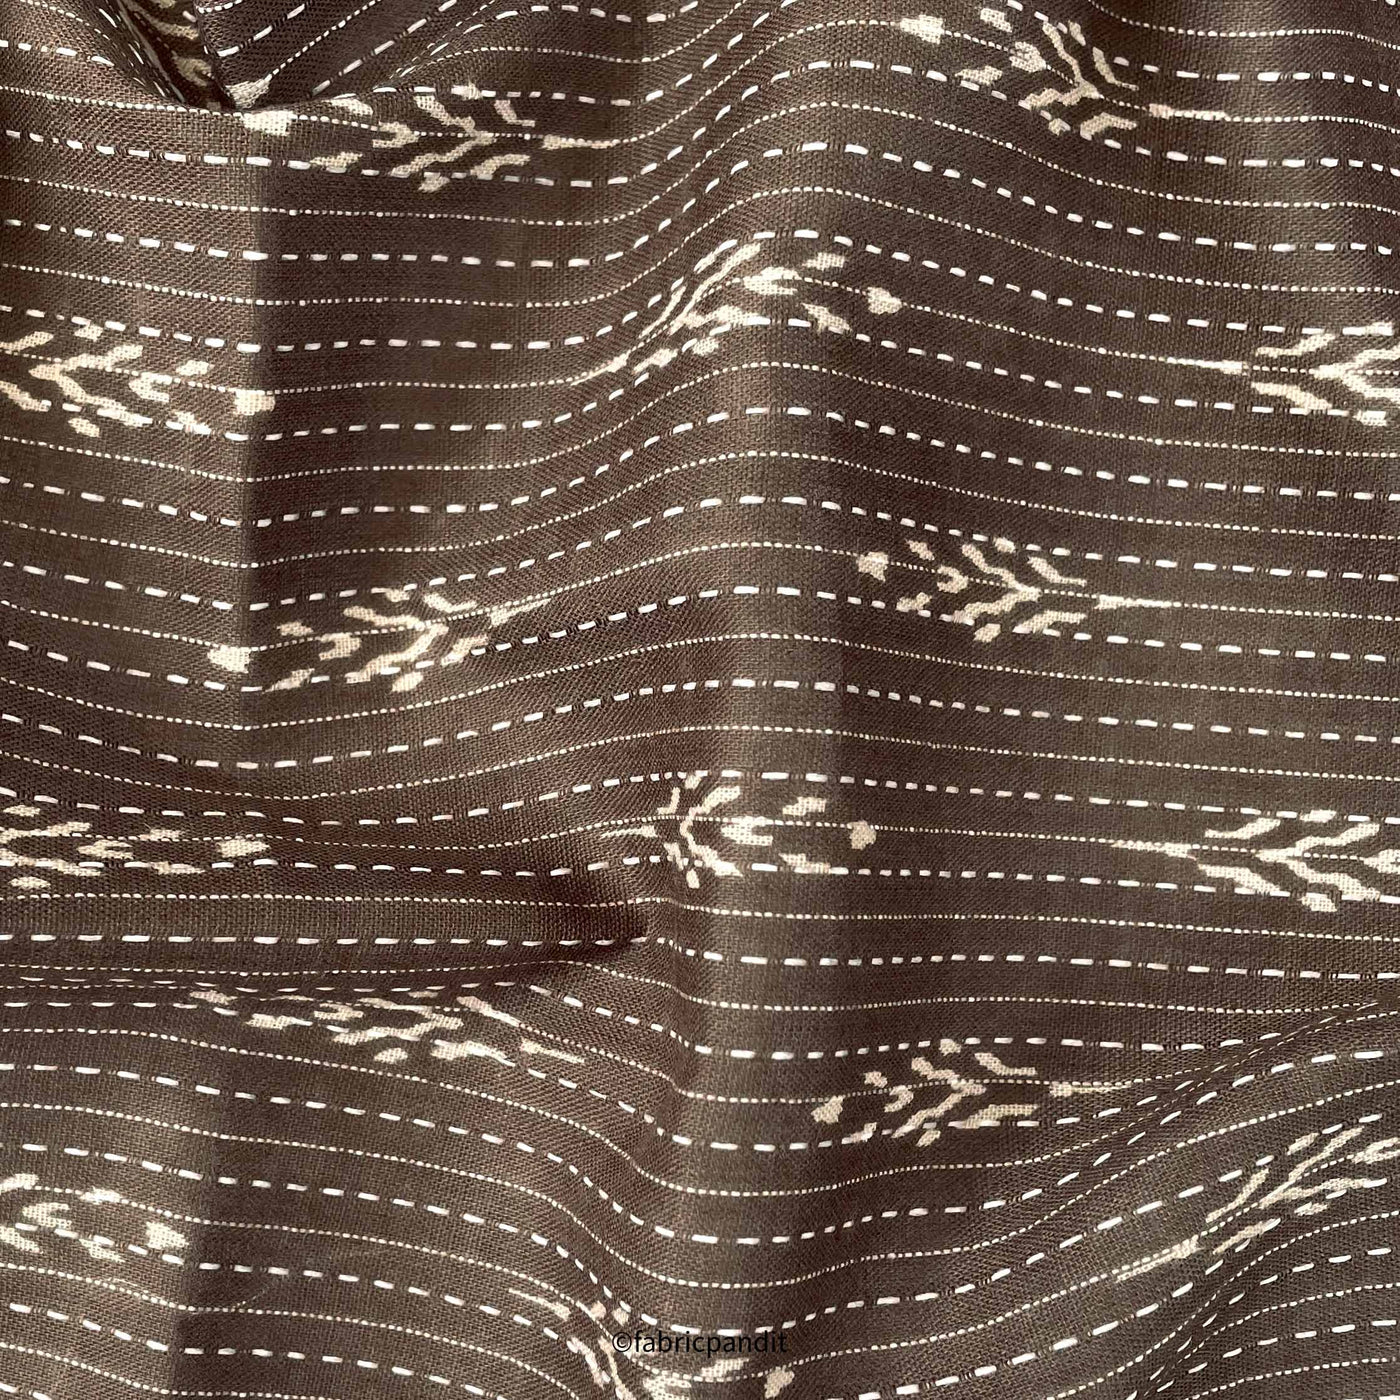 Fabric Pandit Fabric Brown Indigo Natural Dyed Abstract Motif Woven Kantha Hand Block Printed Pure Cotton Fabric (Width 42 inches